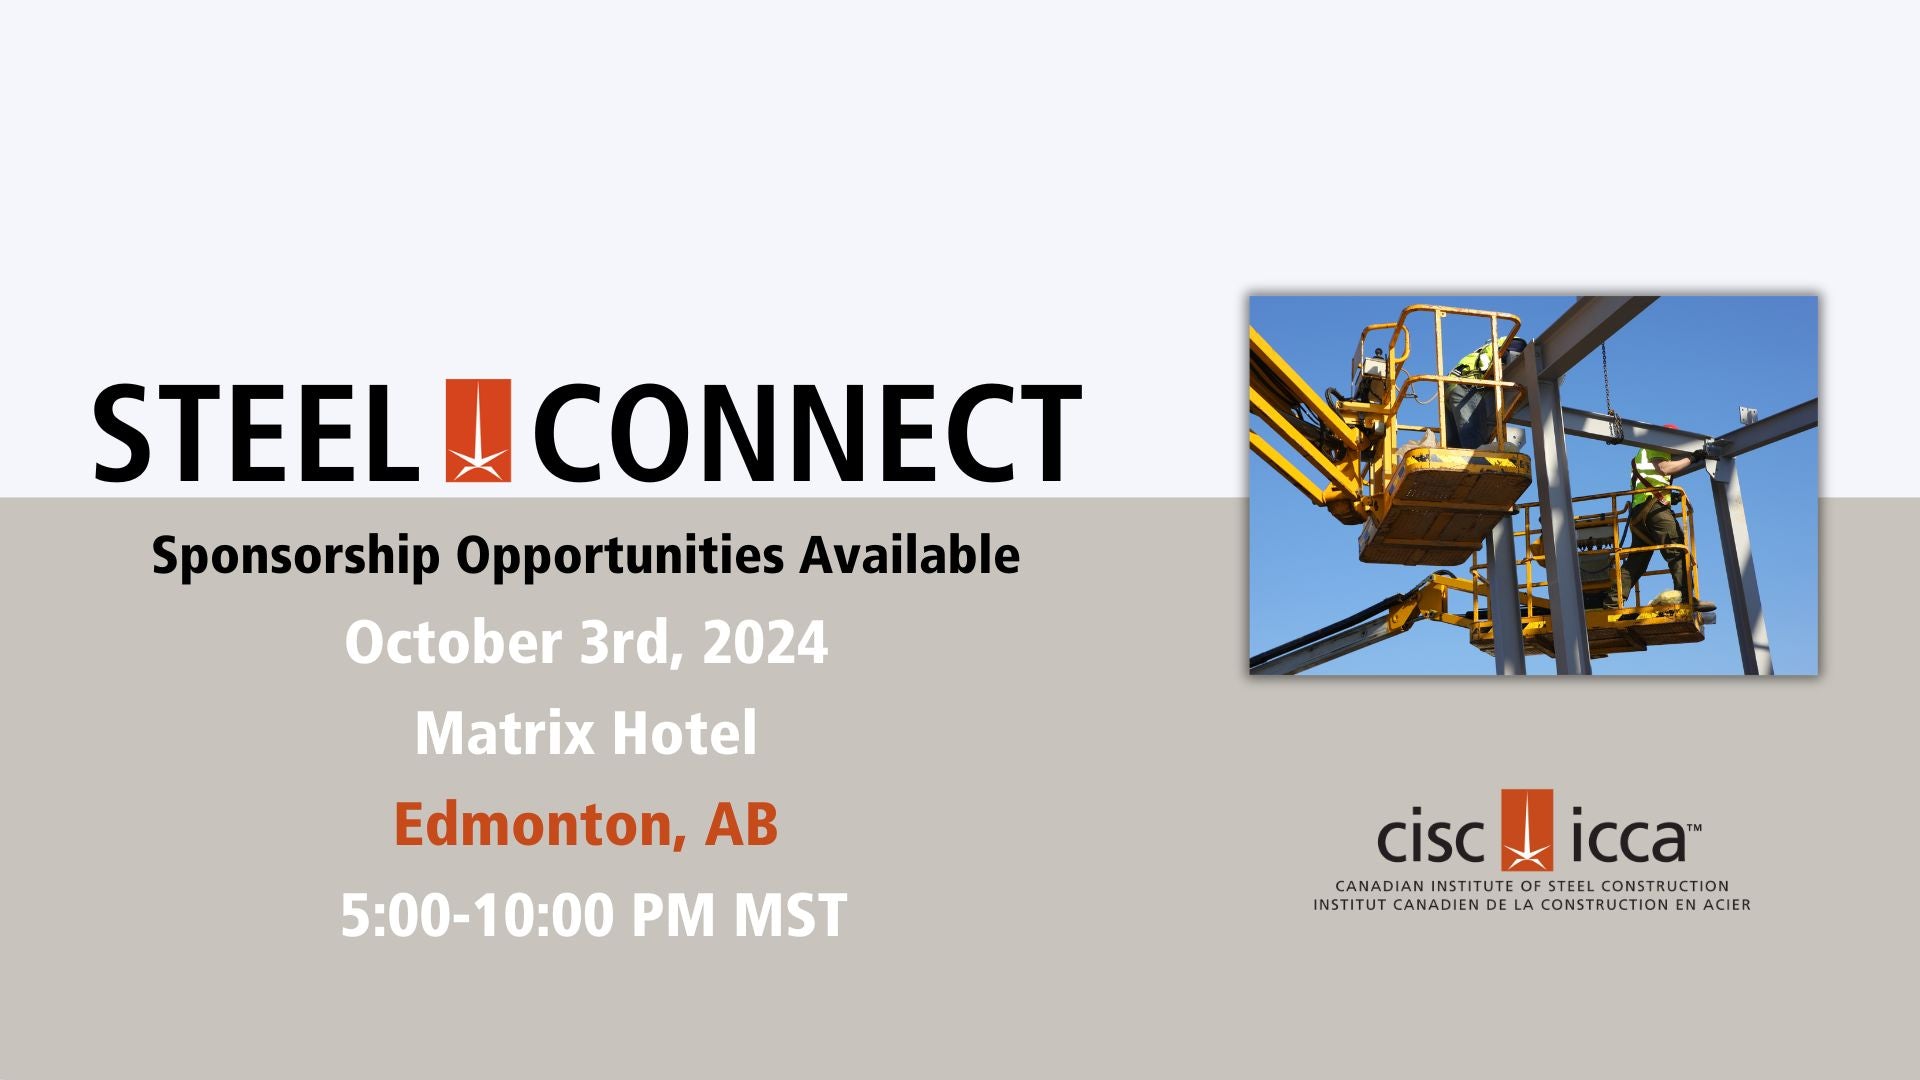 Edmonton SteelConnect Technical Session Sponsorship Opportunity